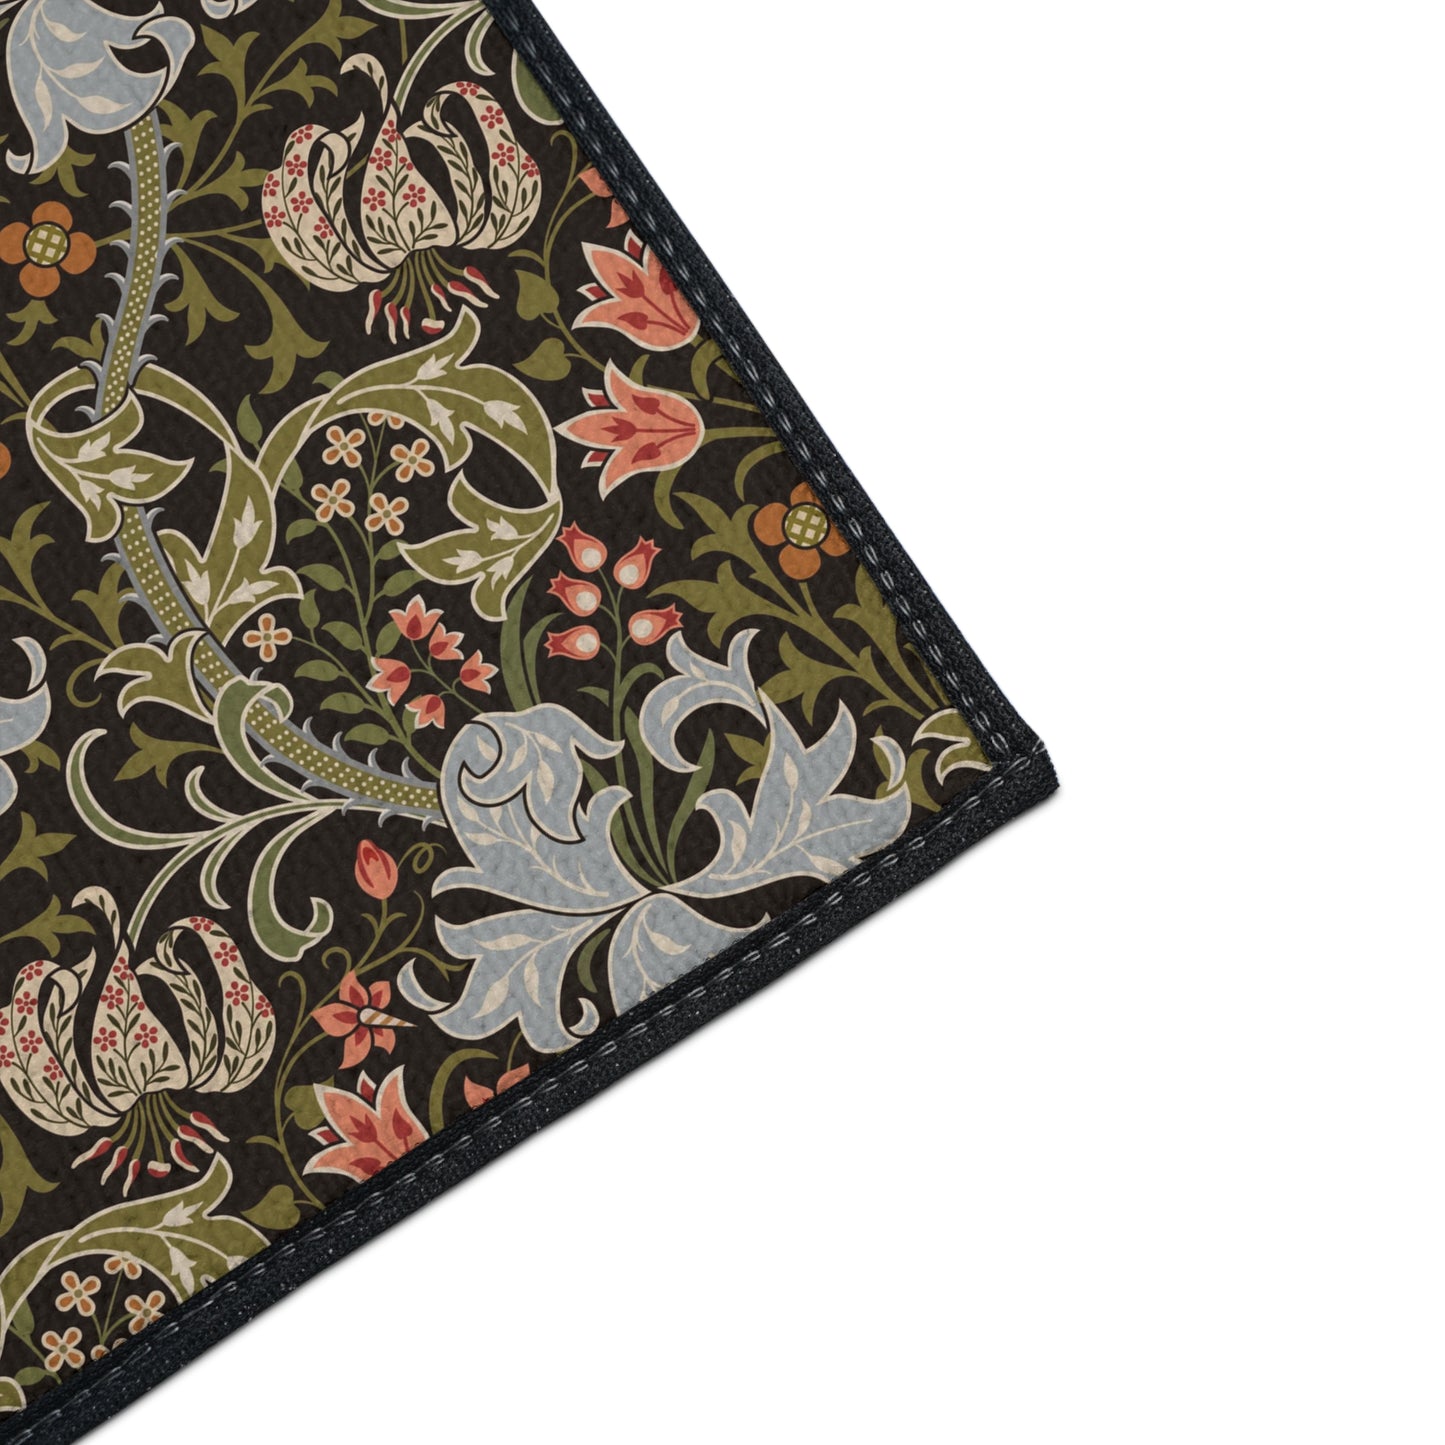 william-morris-co-heavy-duty-floor-mat-golden-lily-collection-midnight-14